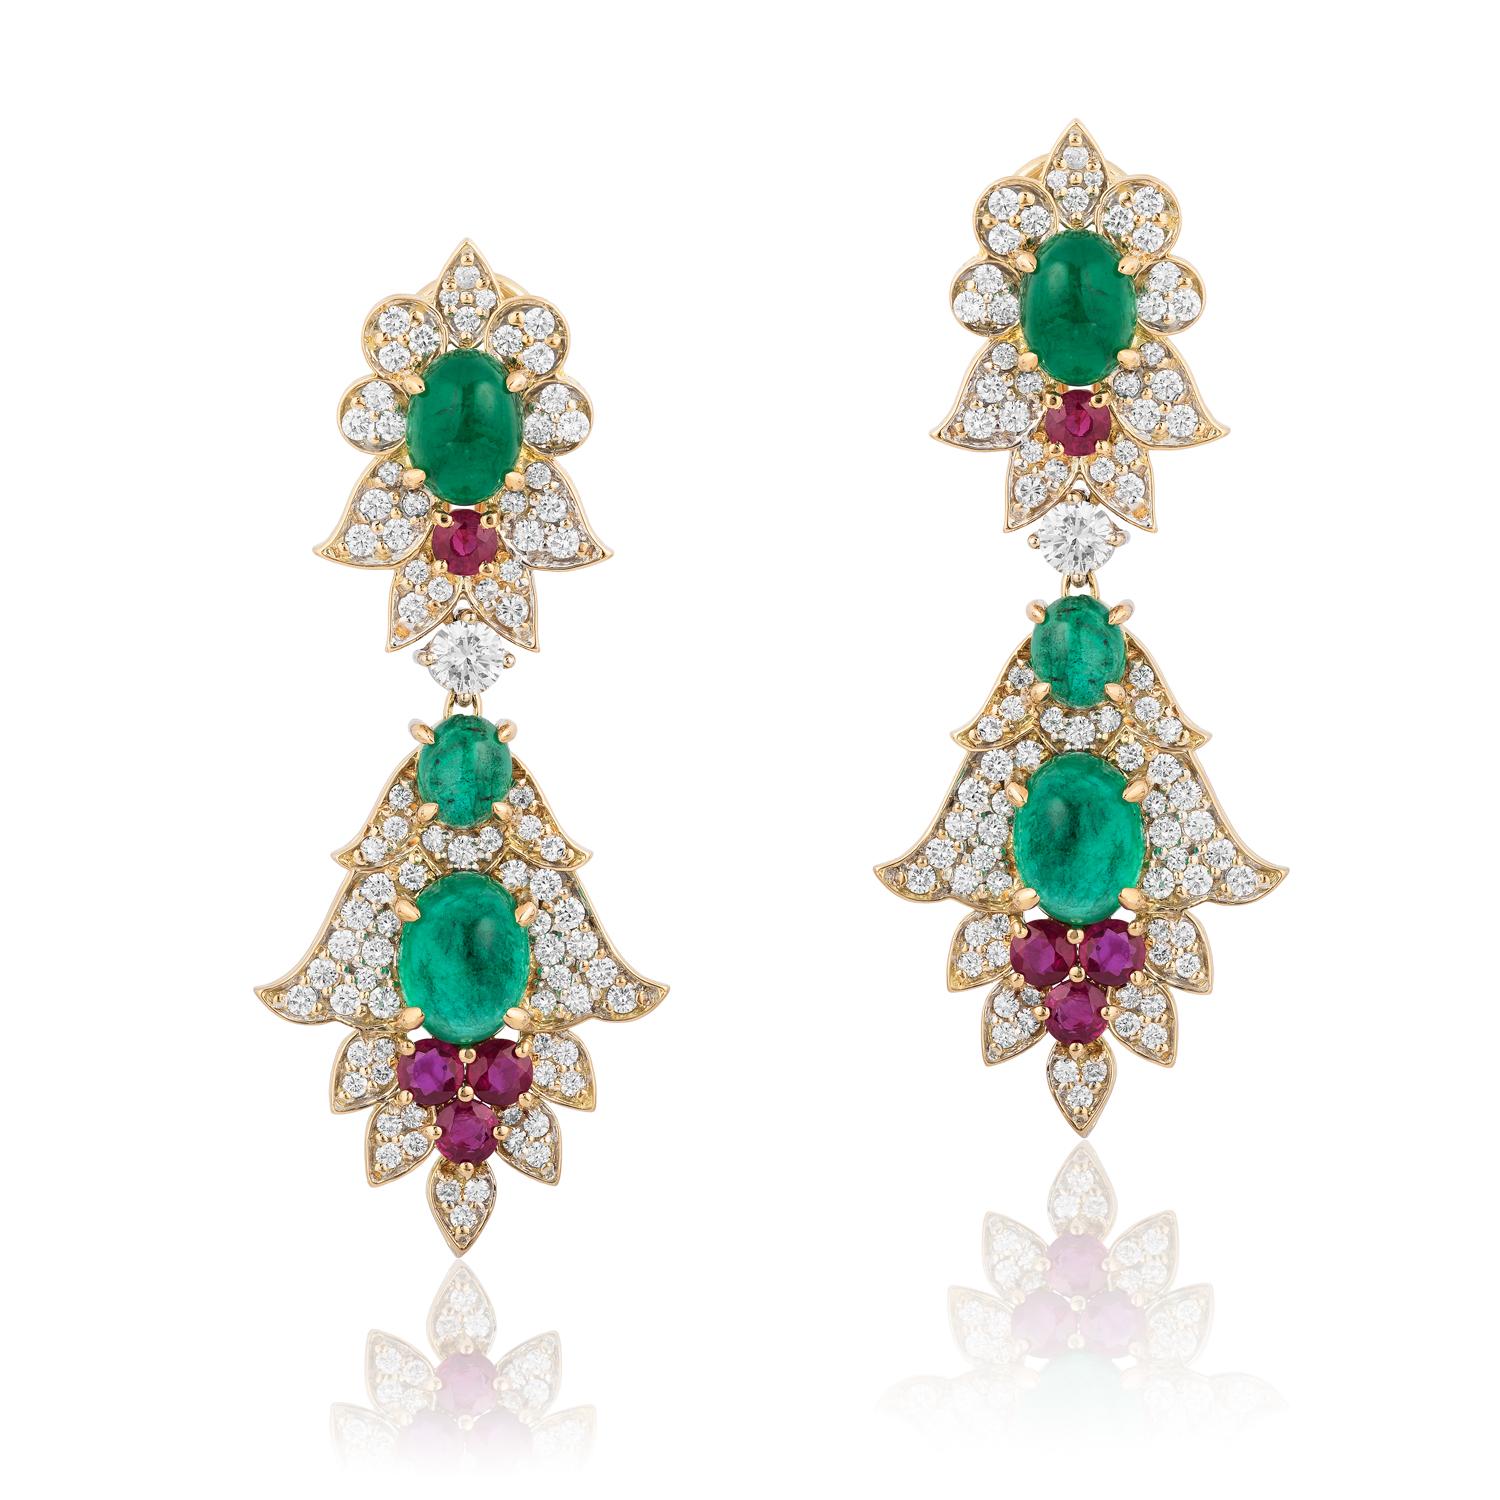 Andreoli Emerald Ruby Earrings Yellow Gold 18 Karat Cabochon Diamond Dangle 

These Andreoli Emerald Ruby 18k yellow gold earrings features:

- 2.21 carat Diamond Round brilliant cut  (F-G-H Color, VS-SI Clarity)
- 9.40 carat Emerald cabochon
- 1.84